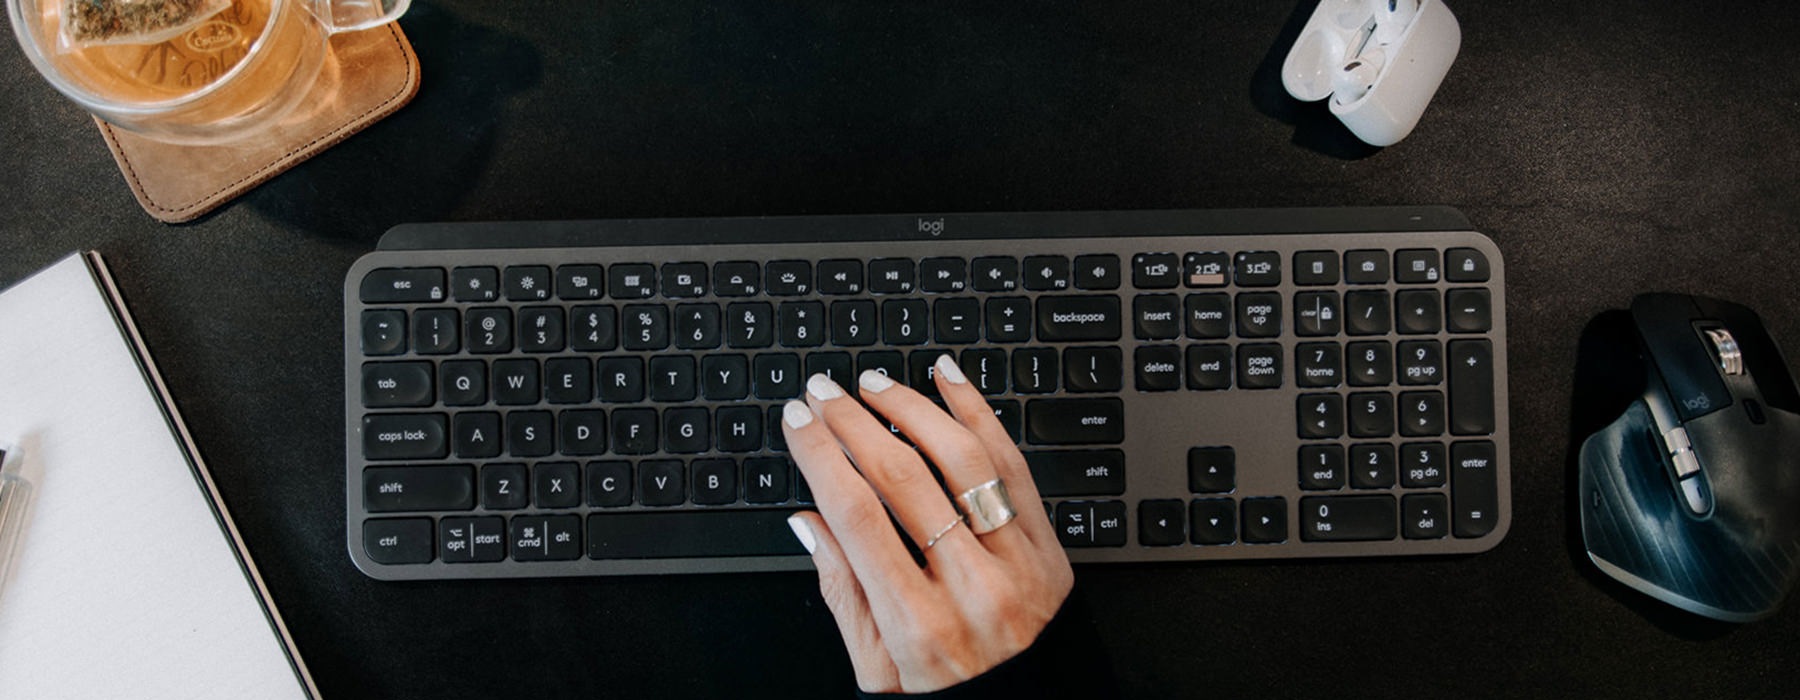 hand on keyboard with coffee and mouse close e